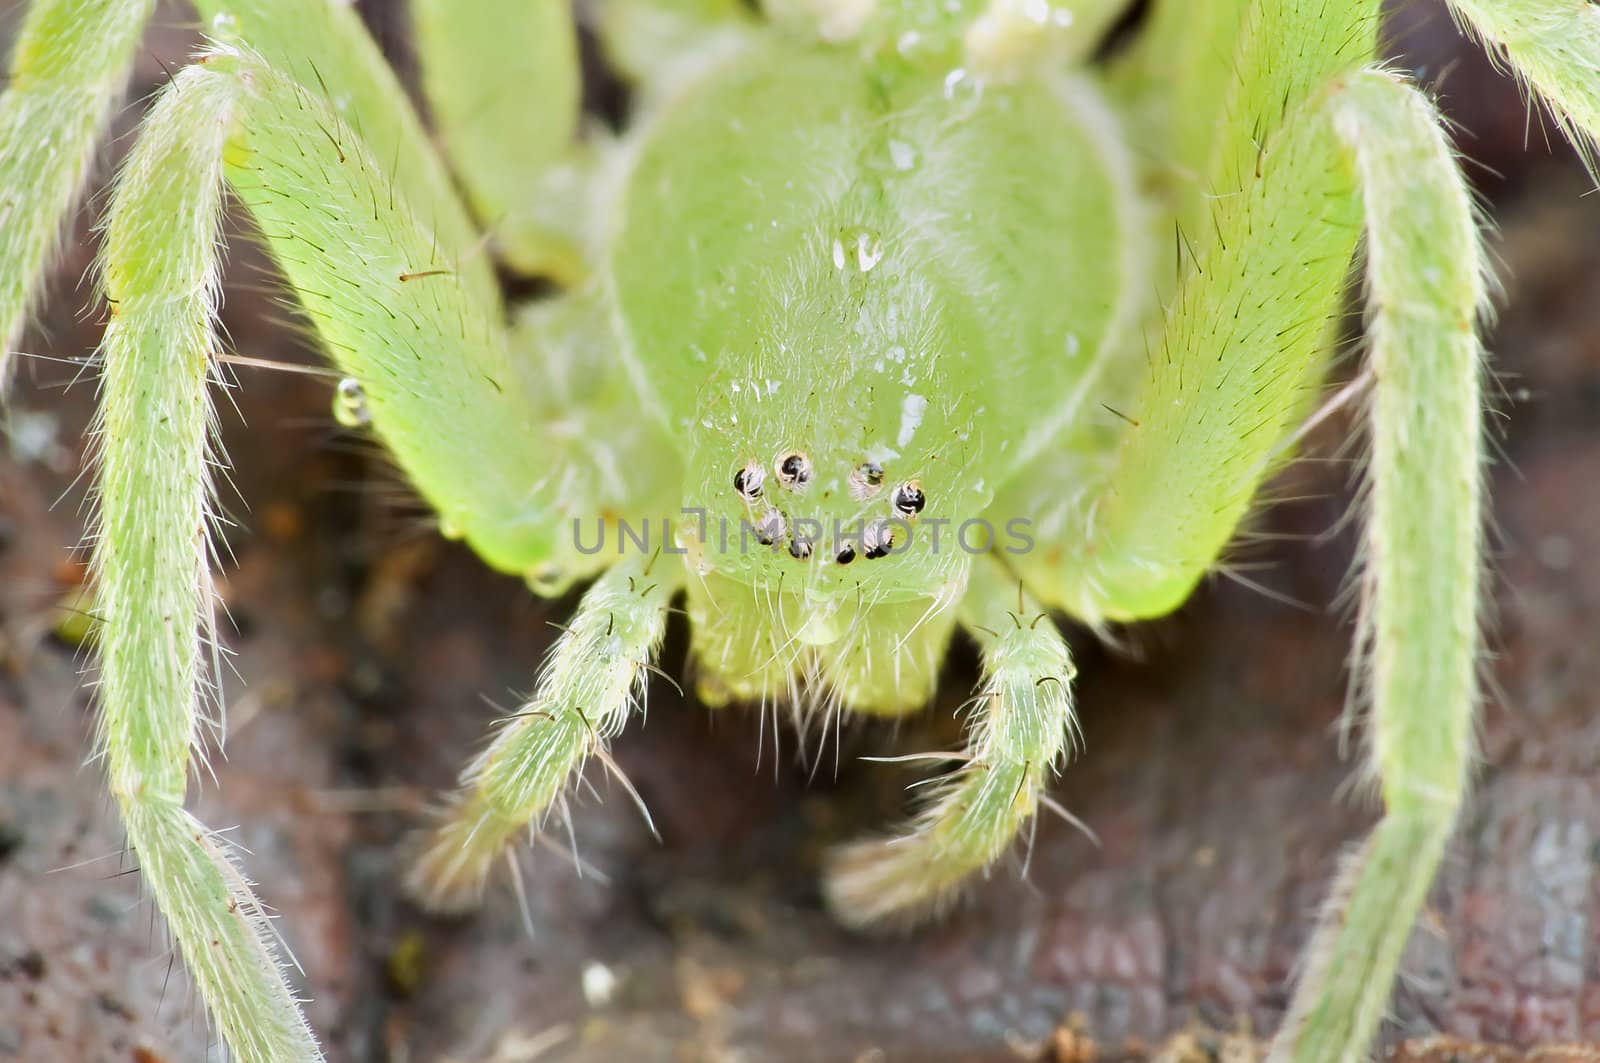 Closeup of a green spider with eight eyes